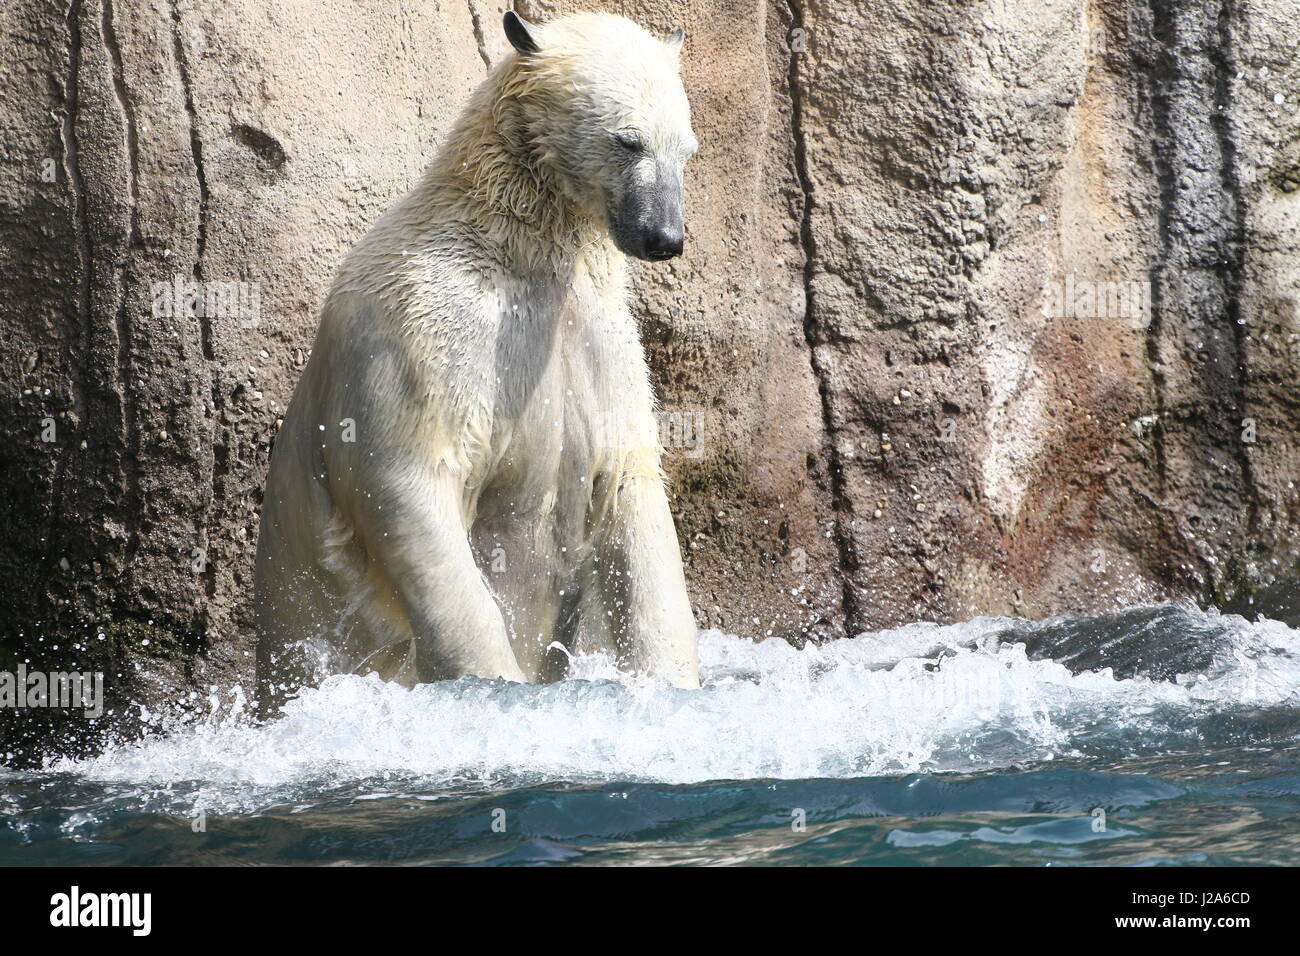 Polar bear (Ursus maritimus) playing with a large plastic ball at Rotterdam Blijdorp Zoo, The Netherlands Stock Photo